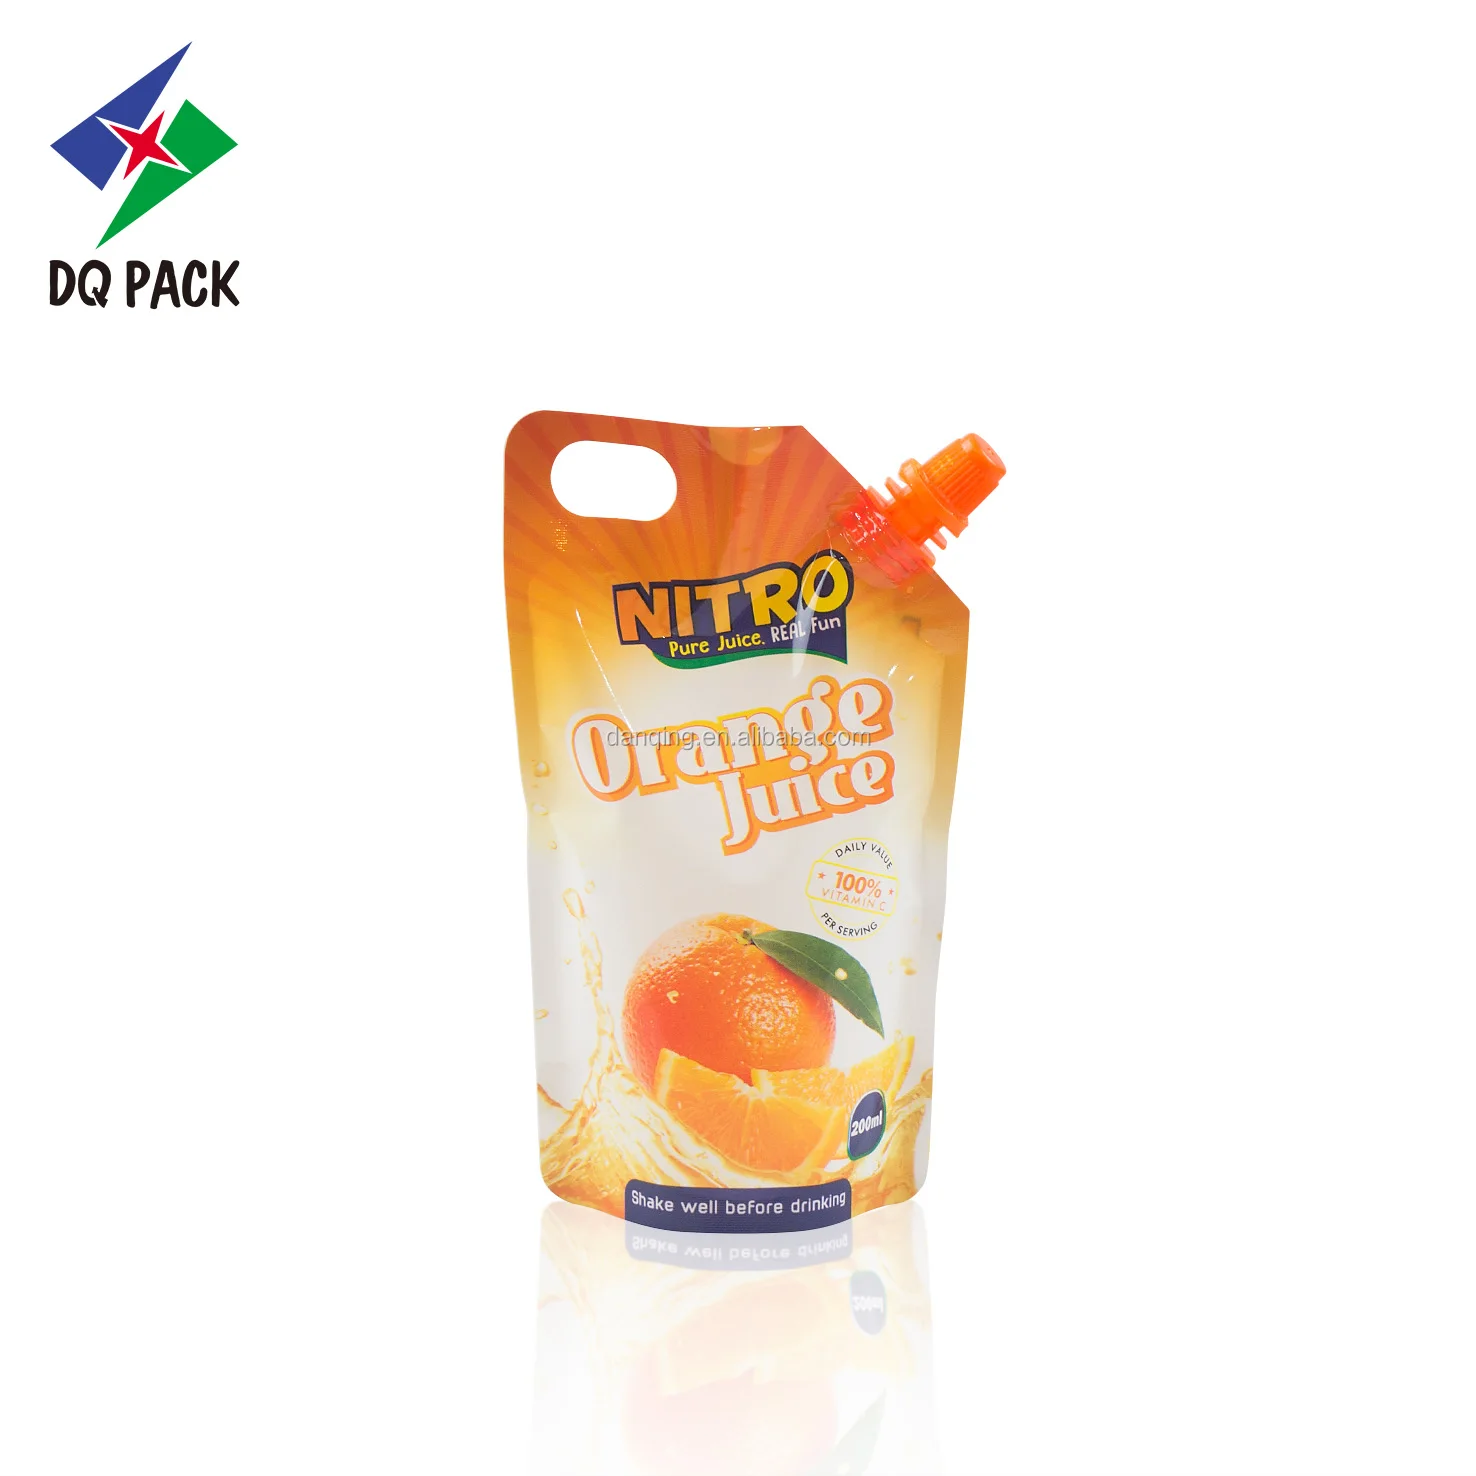 DQ PACK Hot Filling Baby Food Juice Drink Pouch With Corner Spout